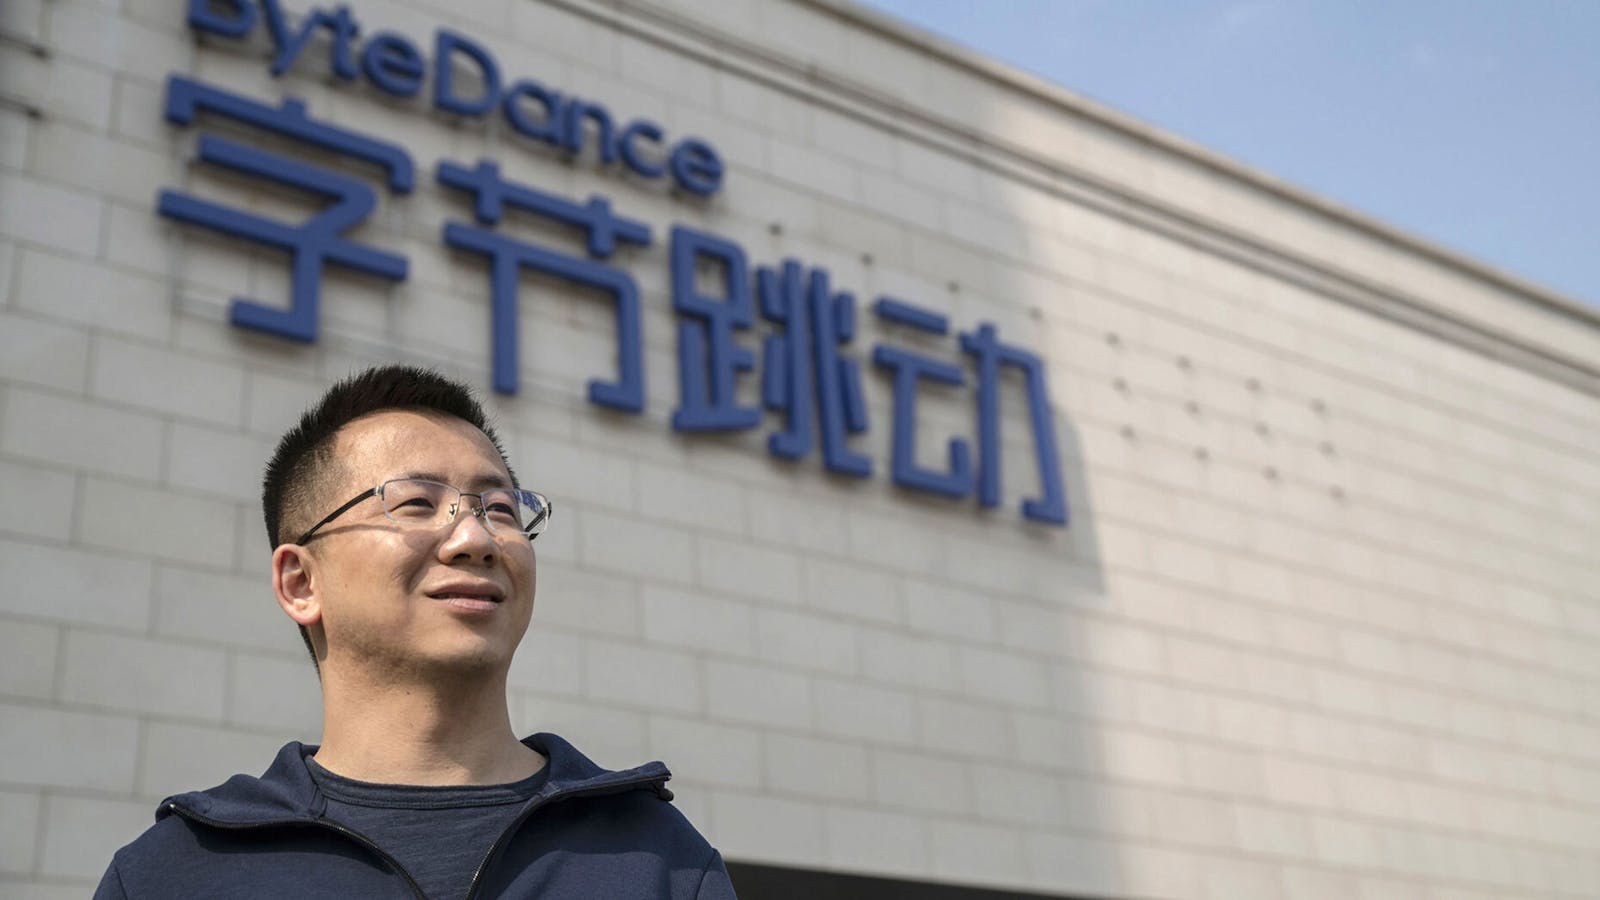 ByteDance's founder Zhang Yiming, who is stepping down as CEO this later year. Photo by Bloomberg.